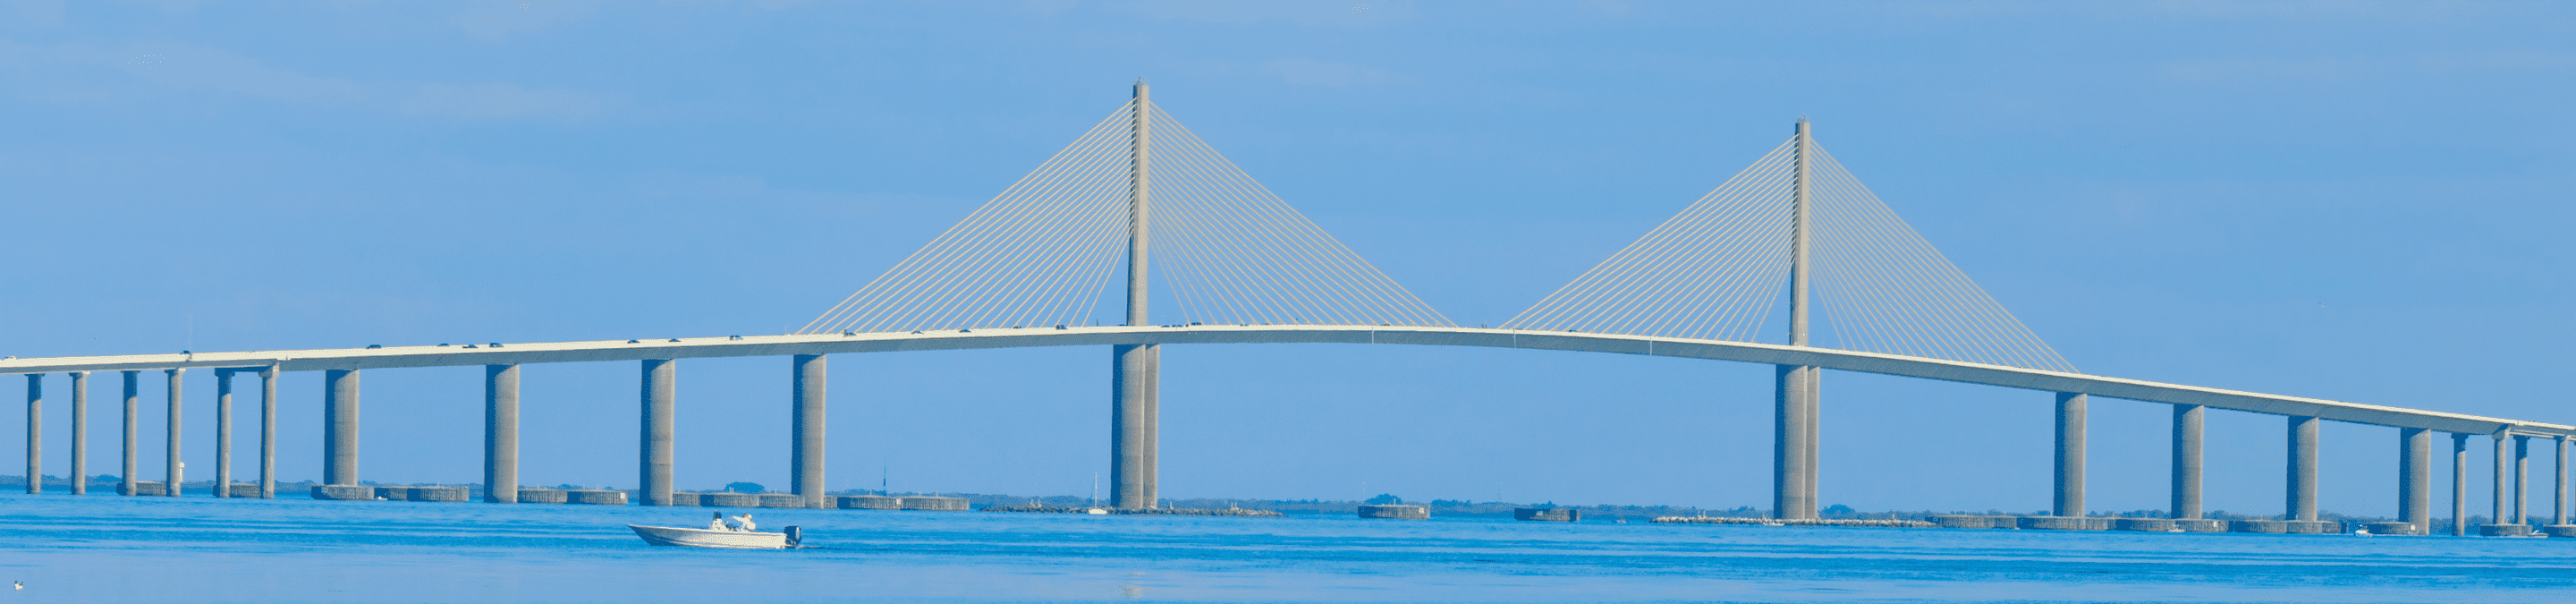 view from the water looking at the Sunshine Skyway bridge over the lower Tampa Bay connecting St Petersburg to Terra Ceia